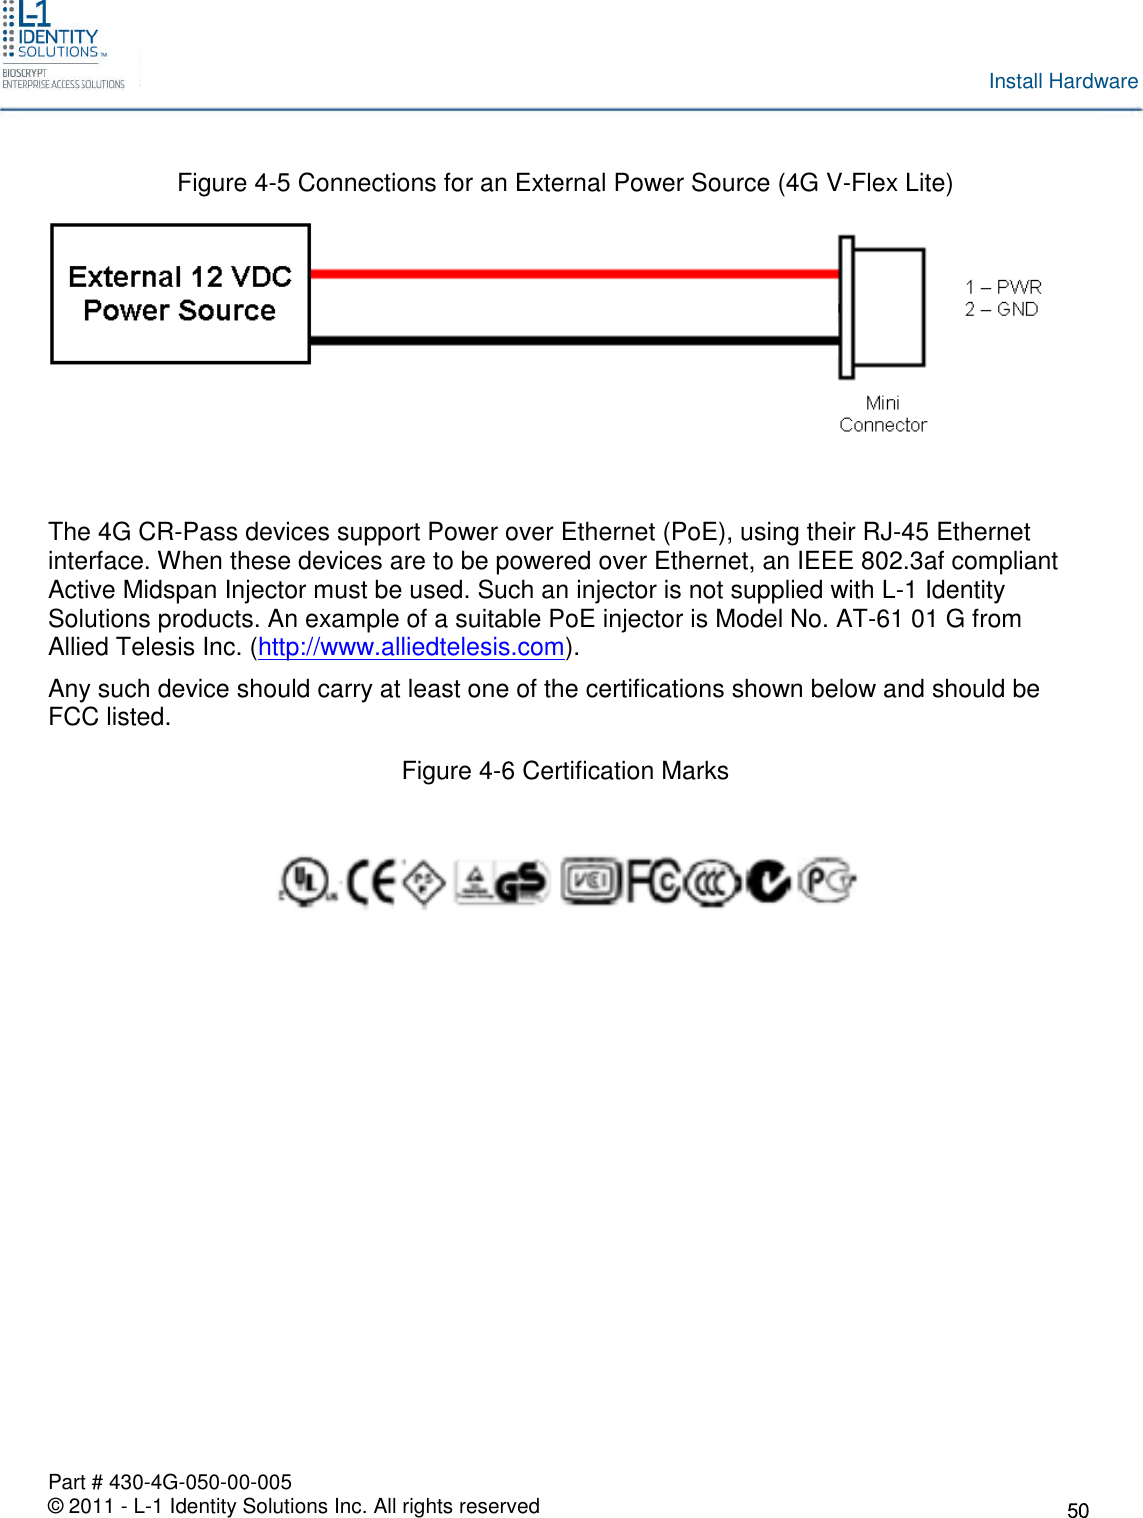 Part # 430-4G-050-00-005© 2011 - L-1 Identity Solutions Inc. All rights reservedInstall HardwareFigure 4-5 Connections for an External Power Source (4G V-Flex Lite)The 4G CR-Pass devices support Power over Ethernet (PoE), using their RJ-45 Ethernetinterface. When these devices are to be powered over Ethernet, an IEEE 802.3af compliantActive Midspan Injector must be used. Such an injector is not supplied with L-1 IdentitySolutions products. An example of a suitable PoE injector is Model No. AT-61 01 G fromAllied Telesis Inc. (http://www.alliedtelesis.com).Any such device should carry at least one of the certifications shown below and should beFCC listed.Figure 4-6 Certification Marks